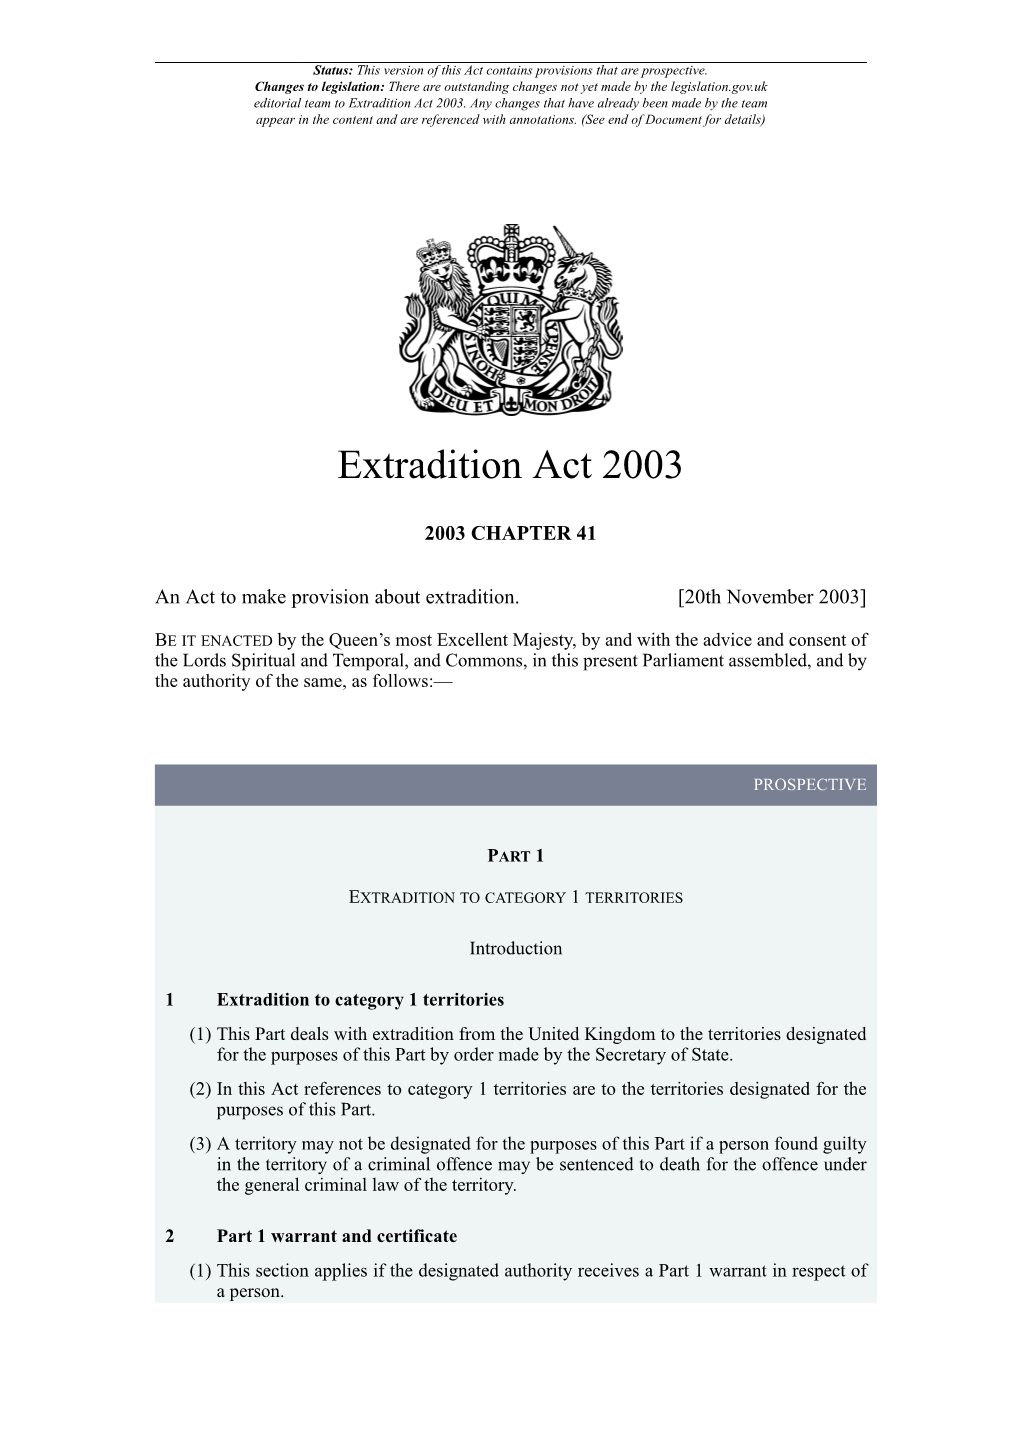 Extradition Act 2003